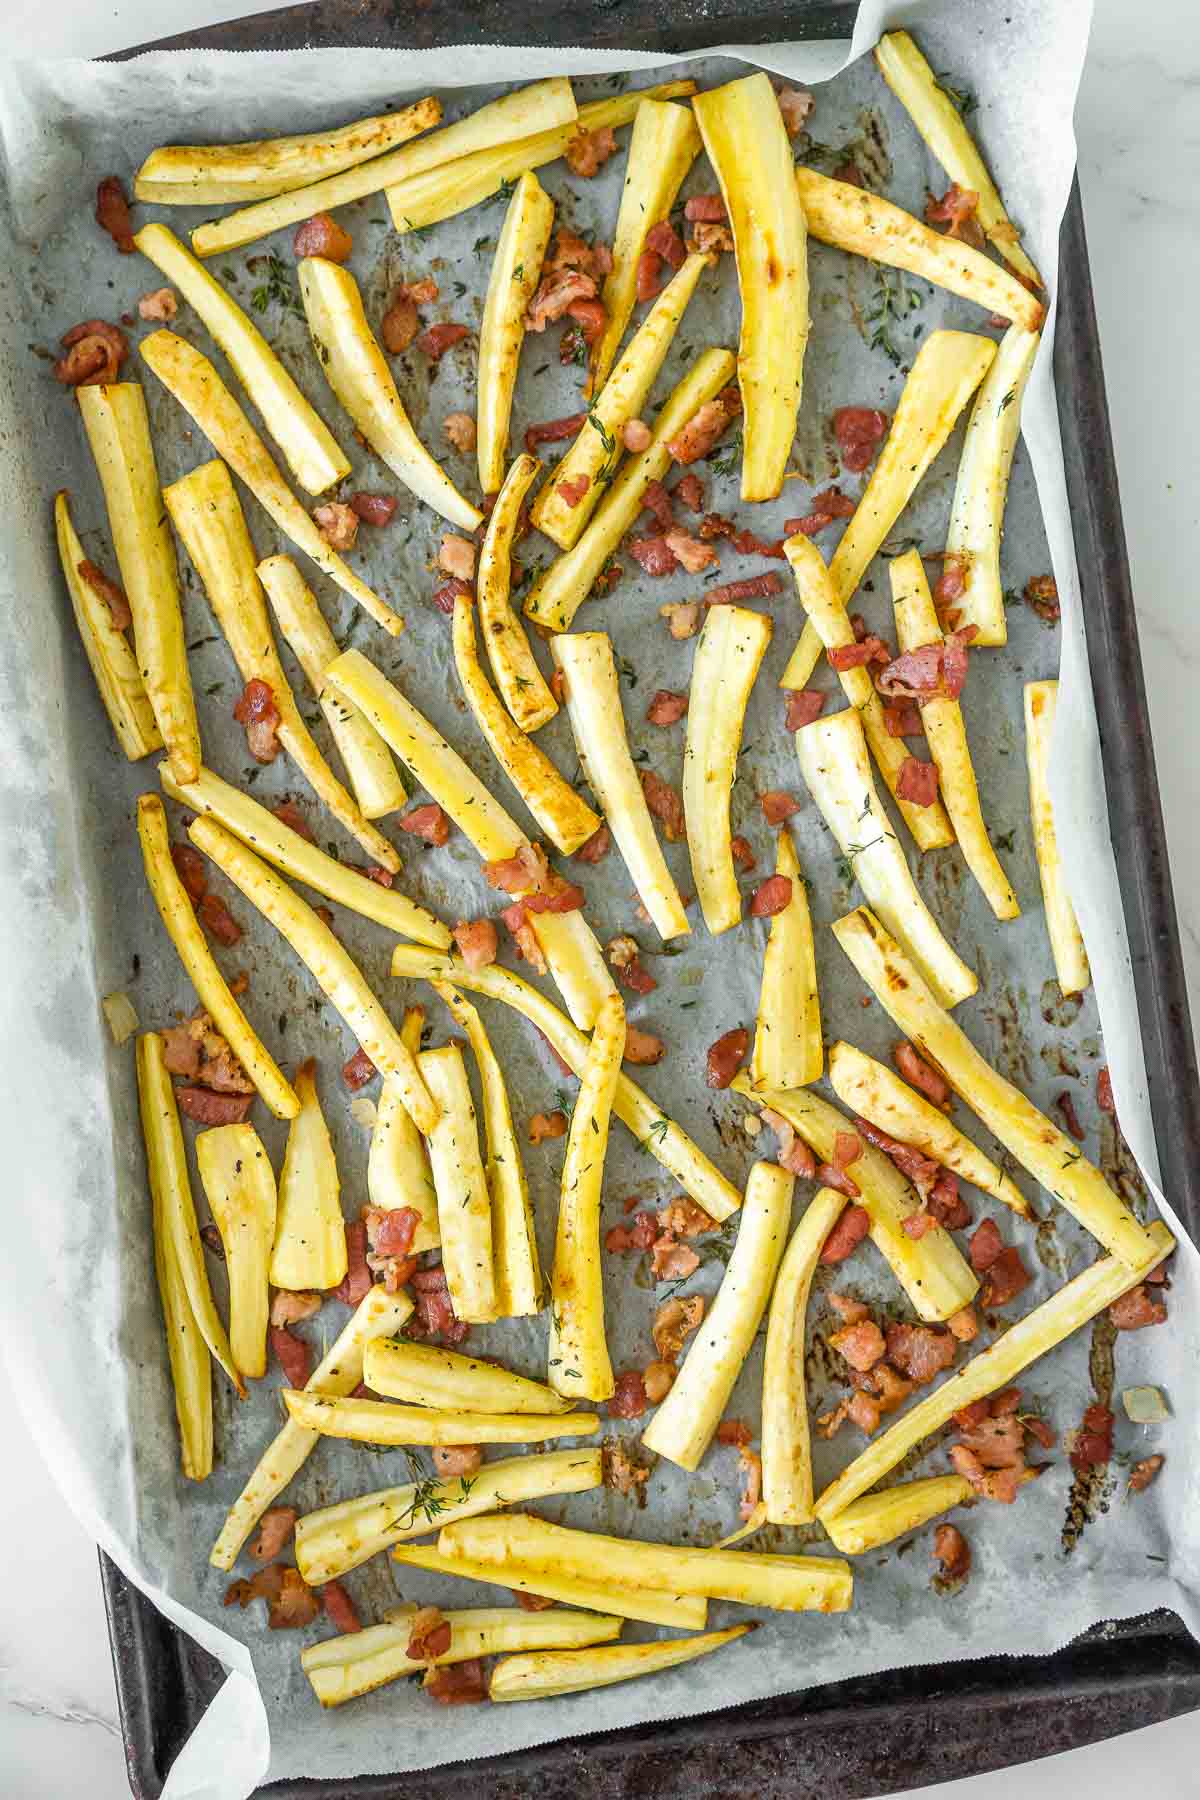 Baking sheet with parsnip fries and crispy bacon bits.